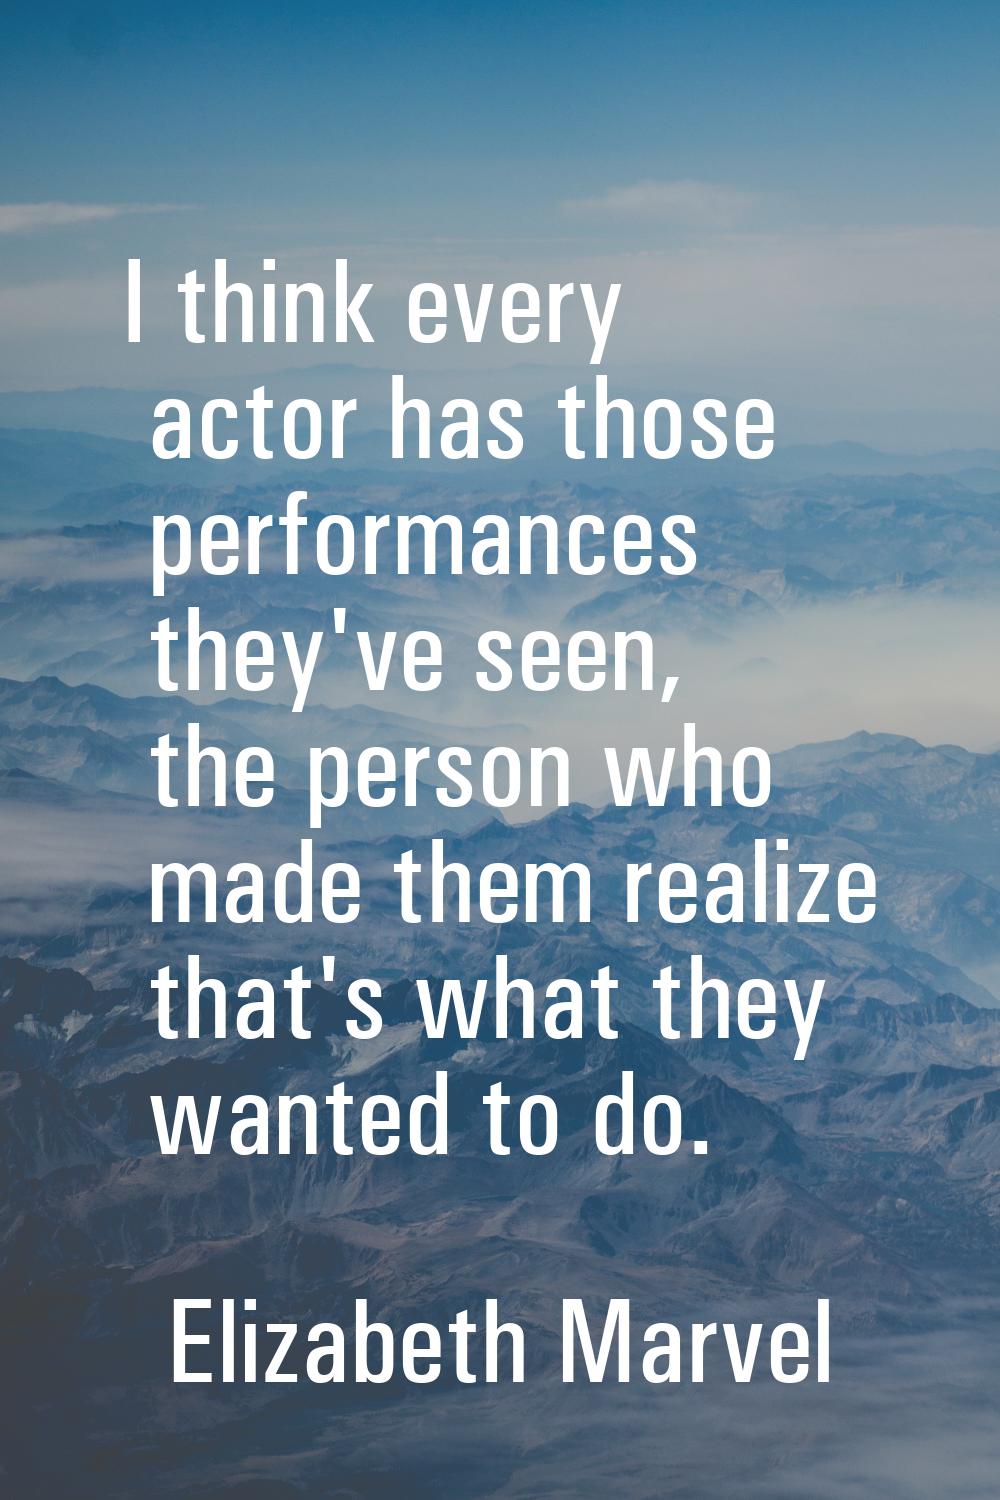 I think every actor has those performances they've seen, the person who made them realize that's wh